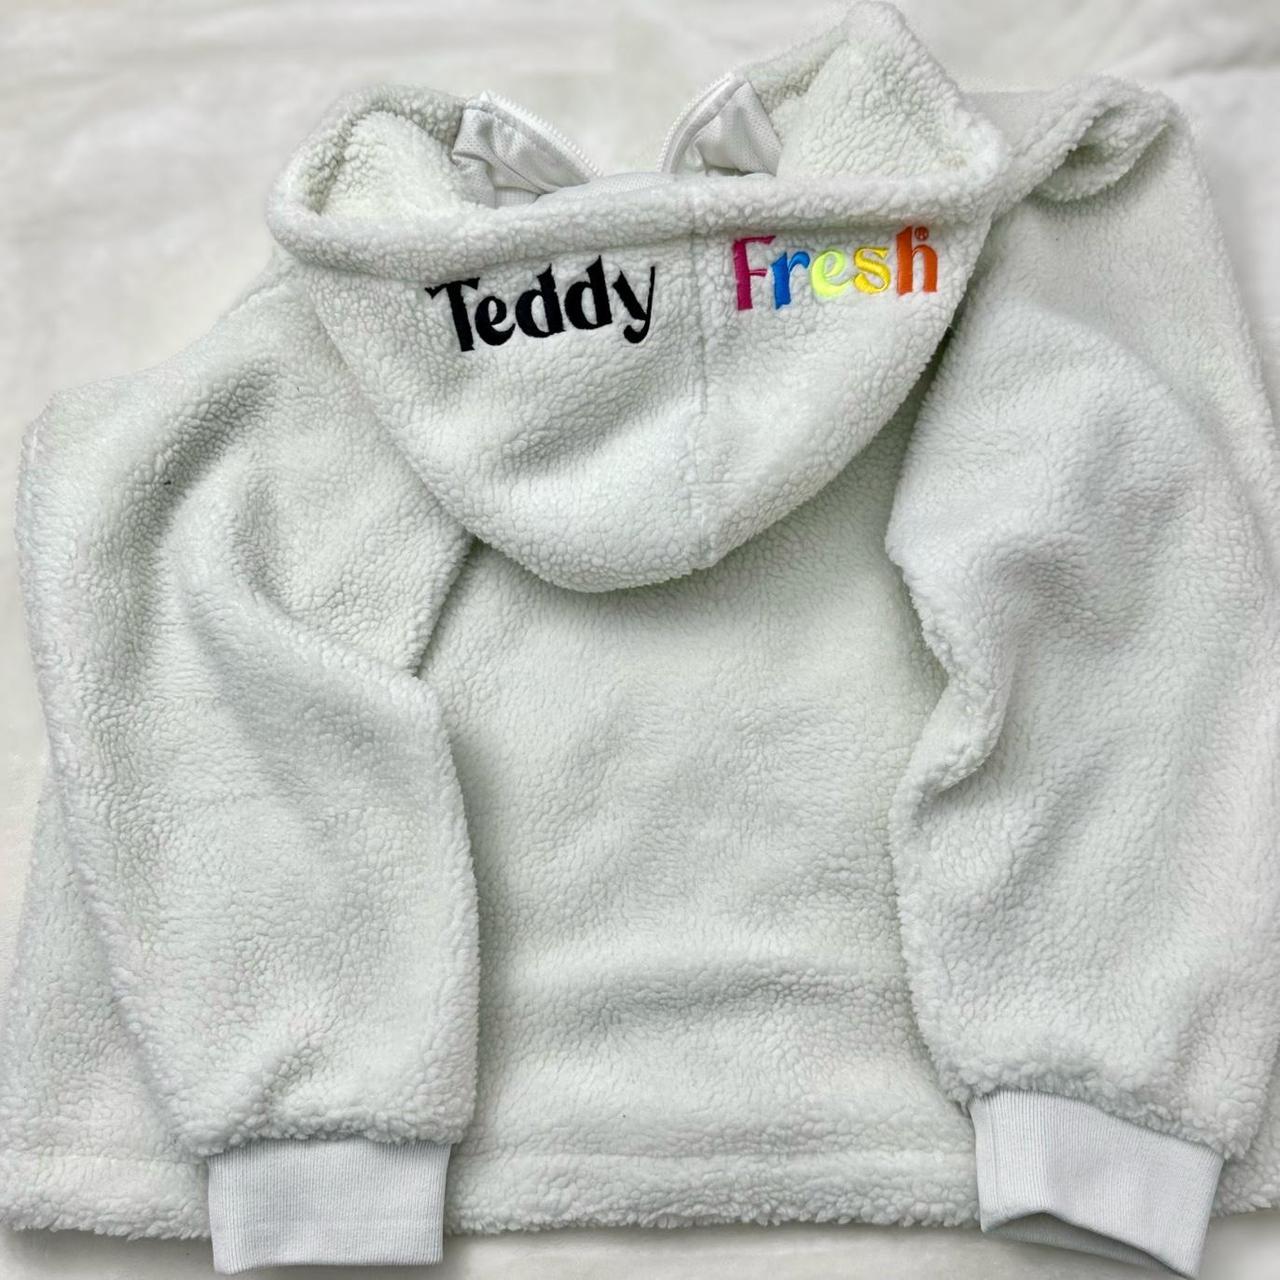 TEDDY FRESH Mens Size Small hoodie. Thick material. - Depop